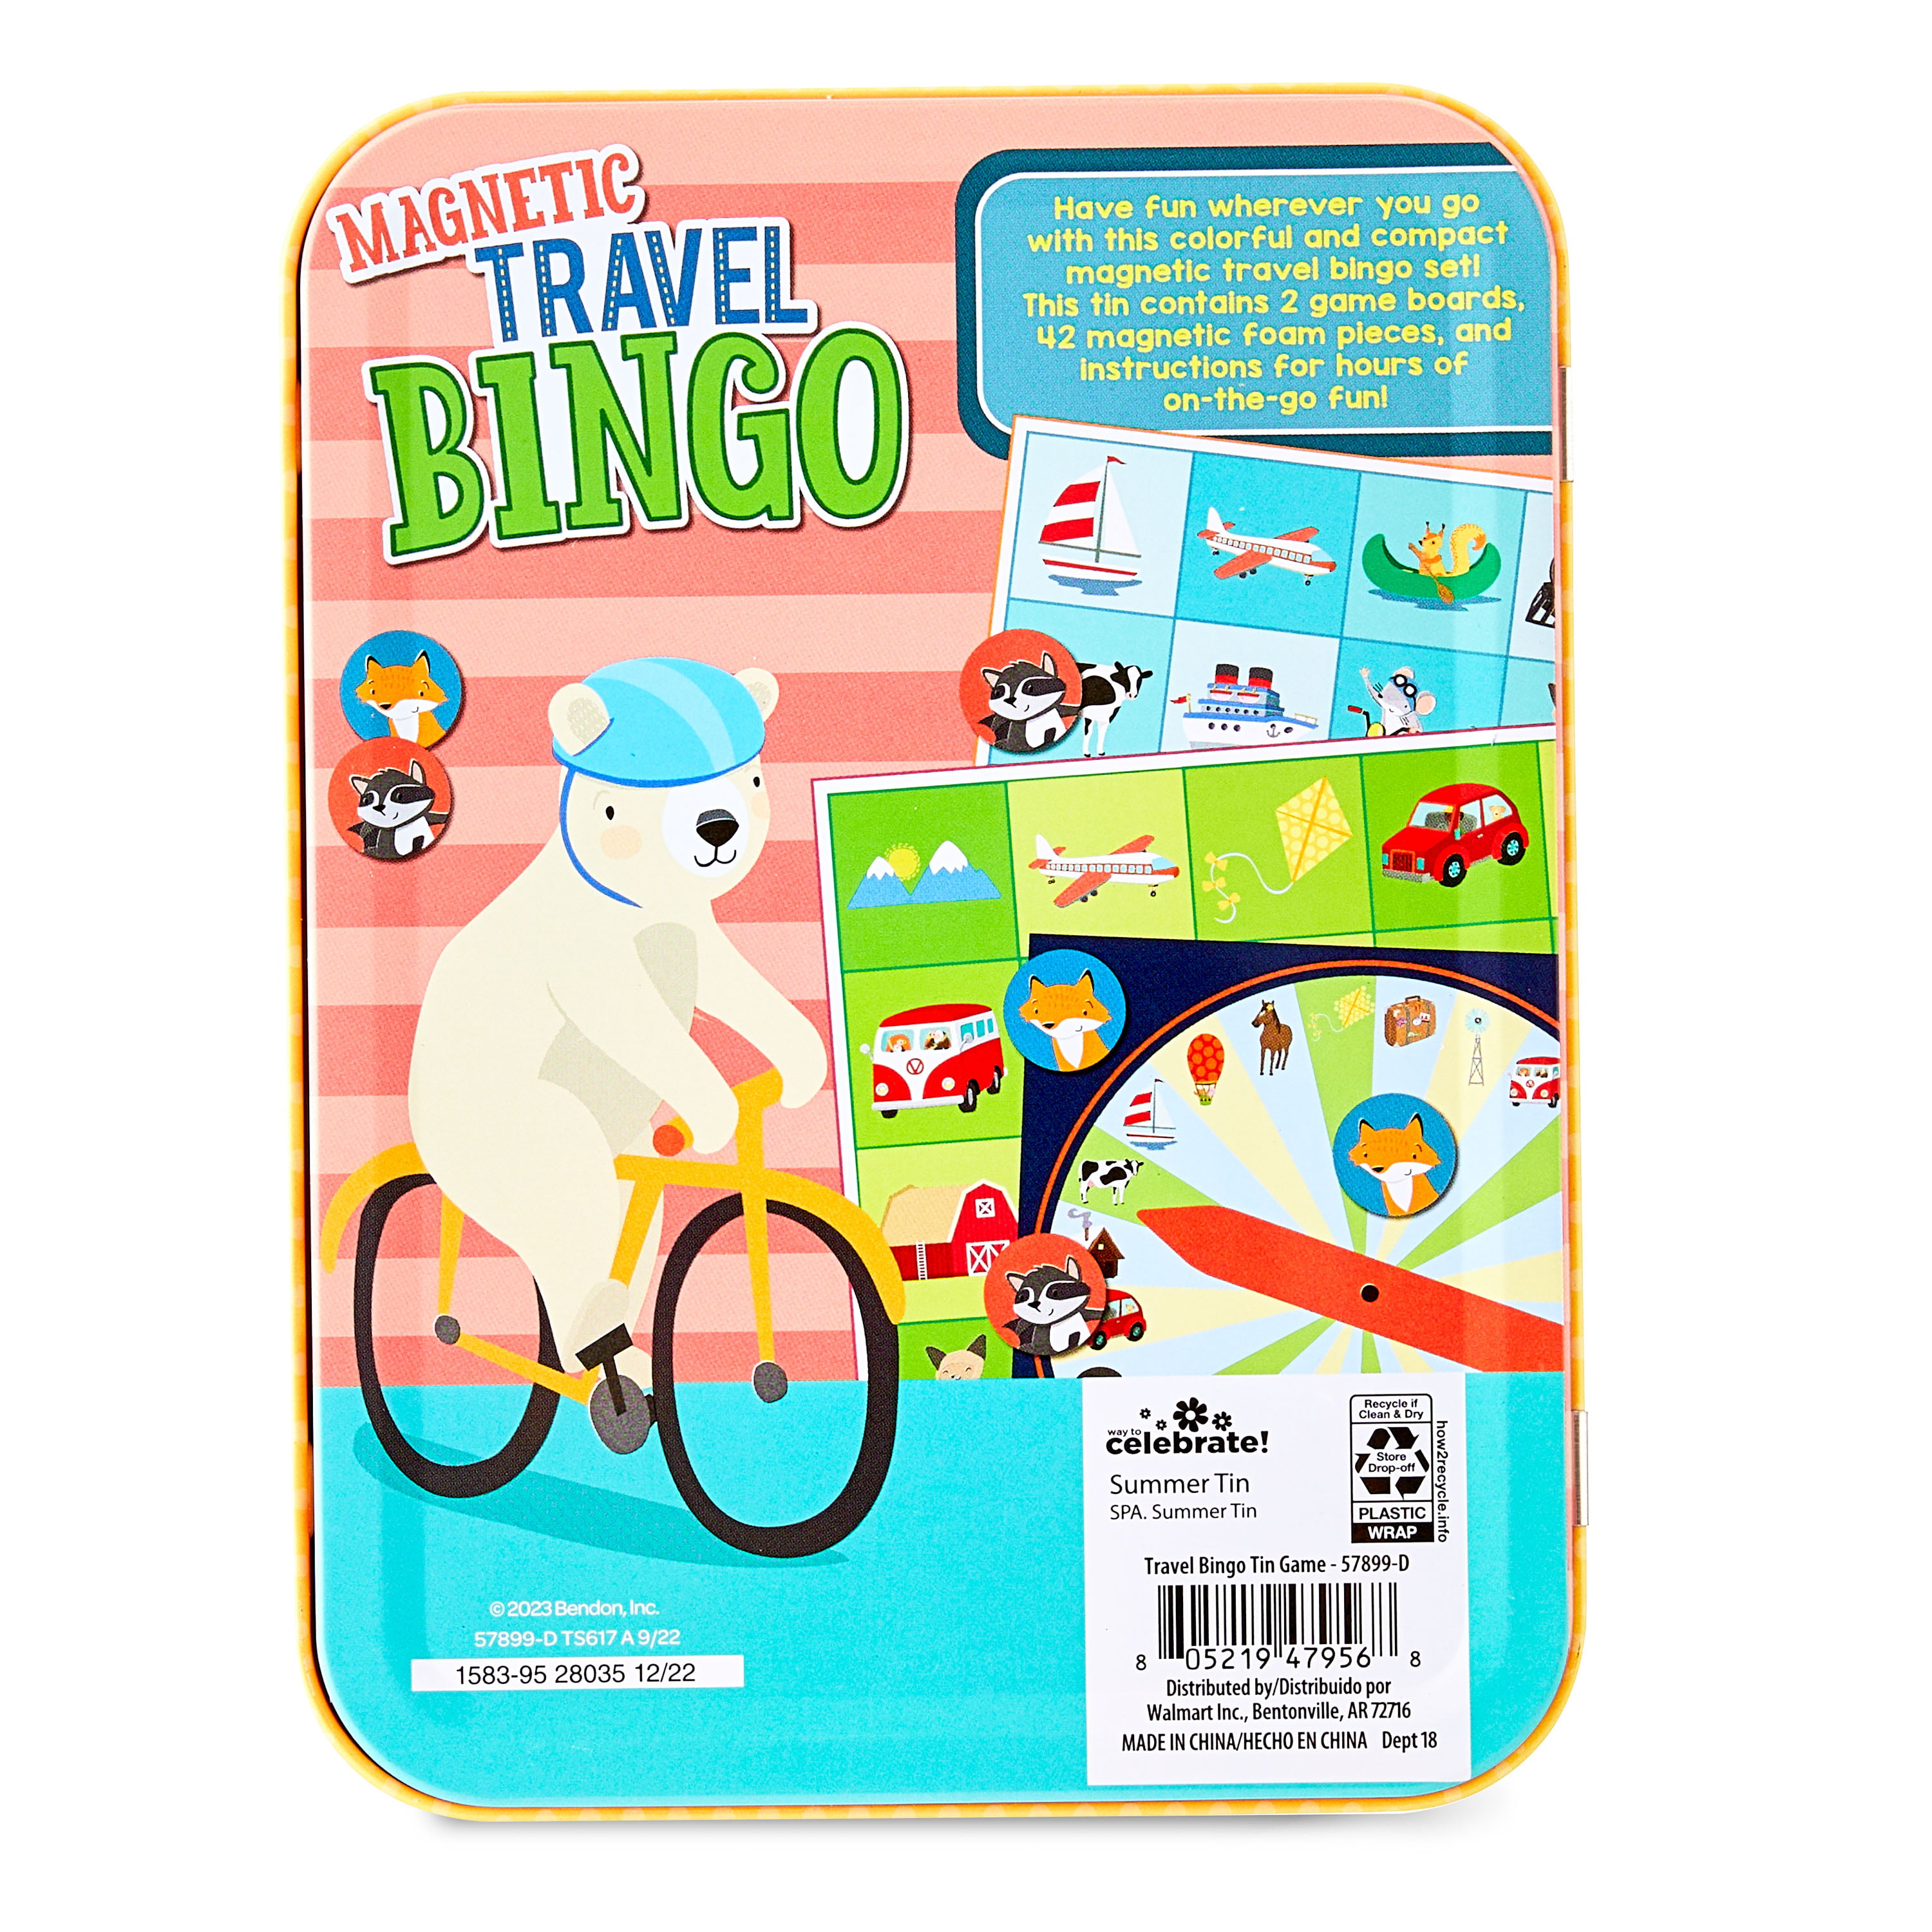  Magnetic Road Trip Bingo for Kids Ages 4-8 - Bundle with Kids  Bingo Games with Magnetic Game Board, Game Spinner, Game Pieces, and More